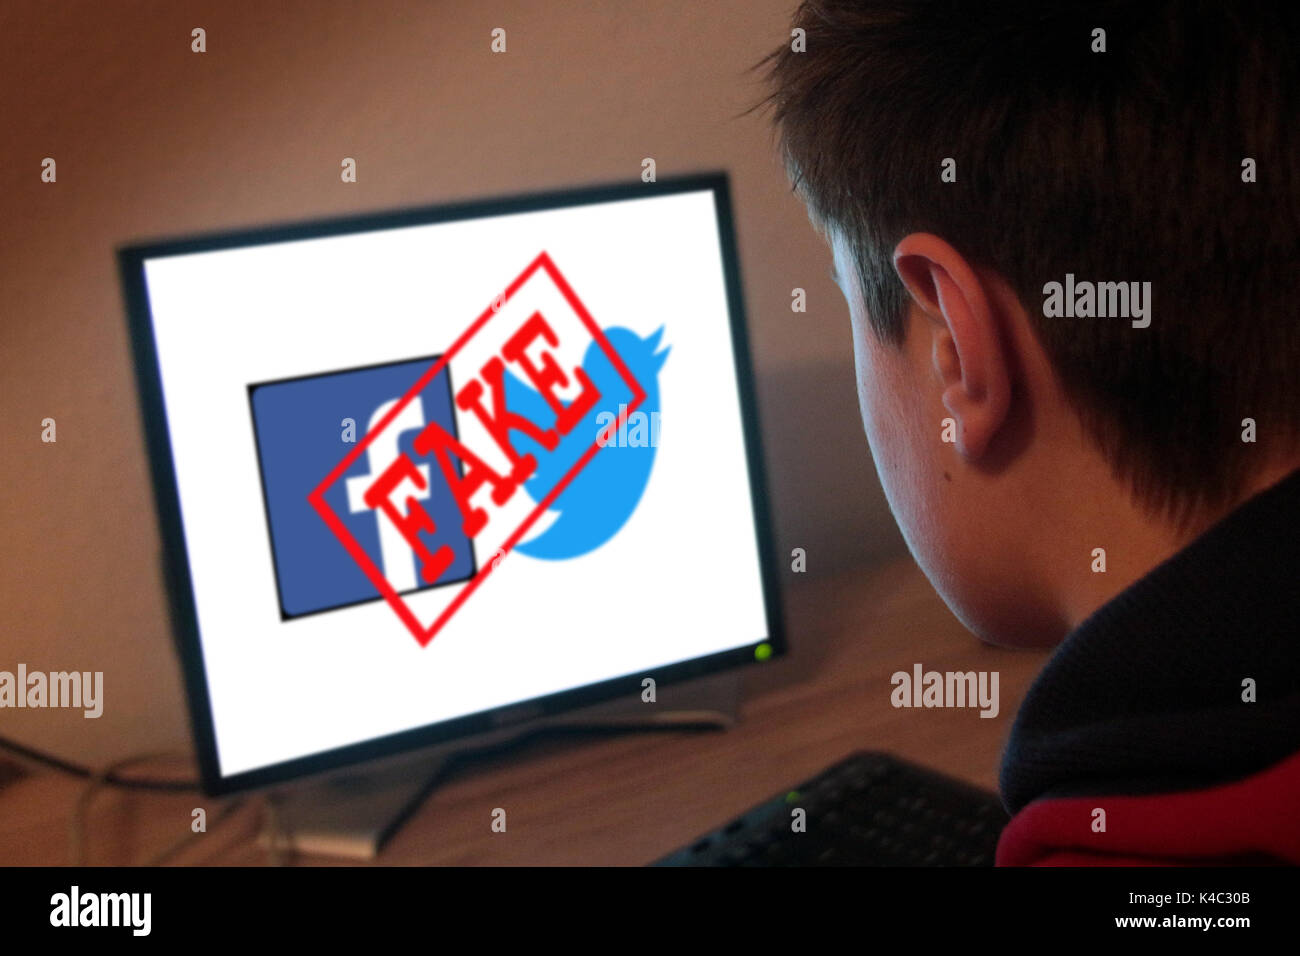 Young Man In Front Of A Computer With Words Fake News Stock Photo